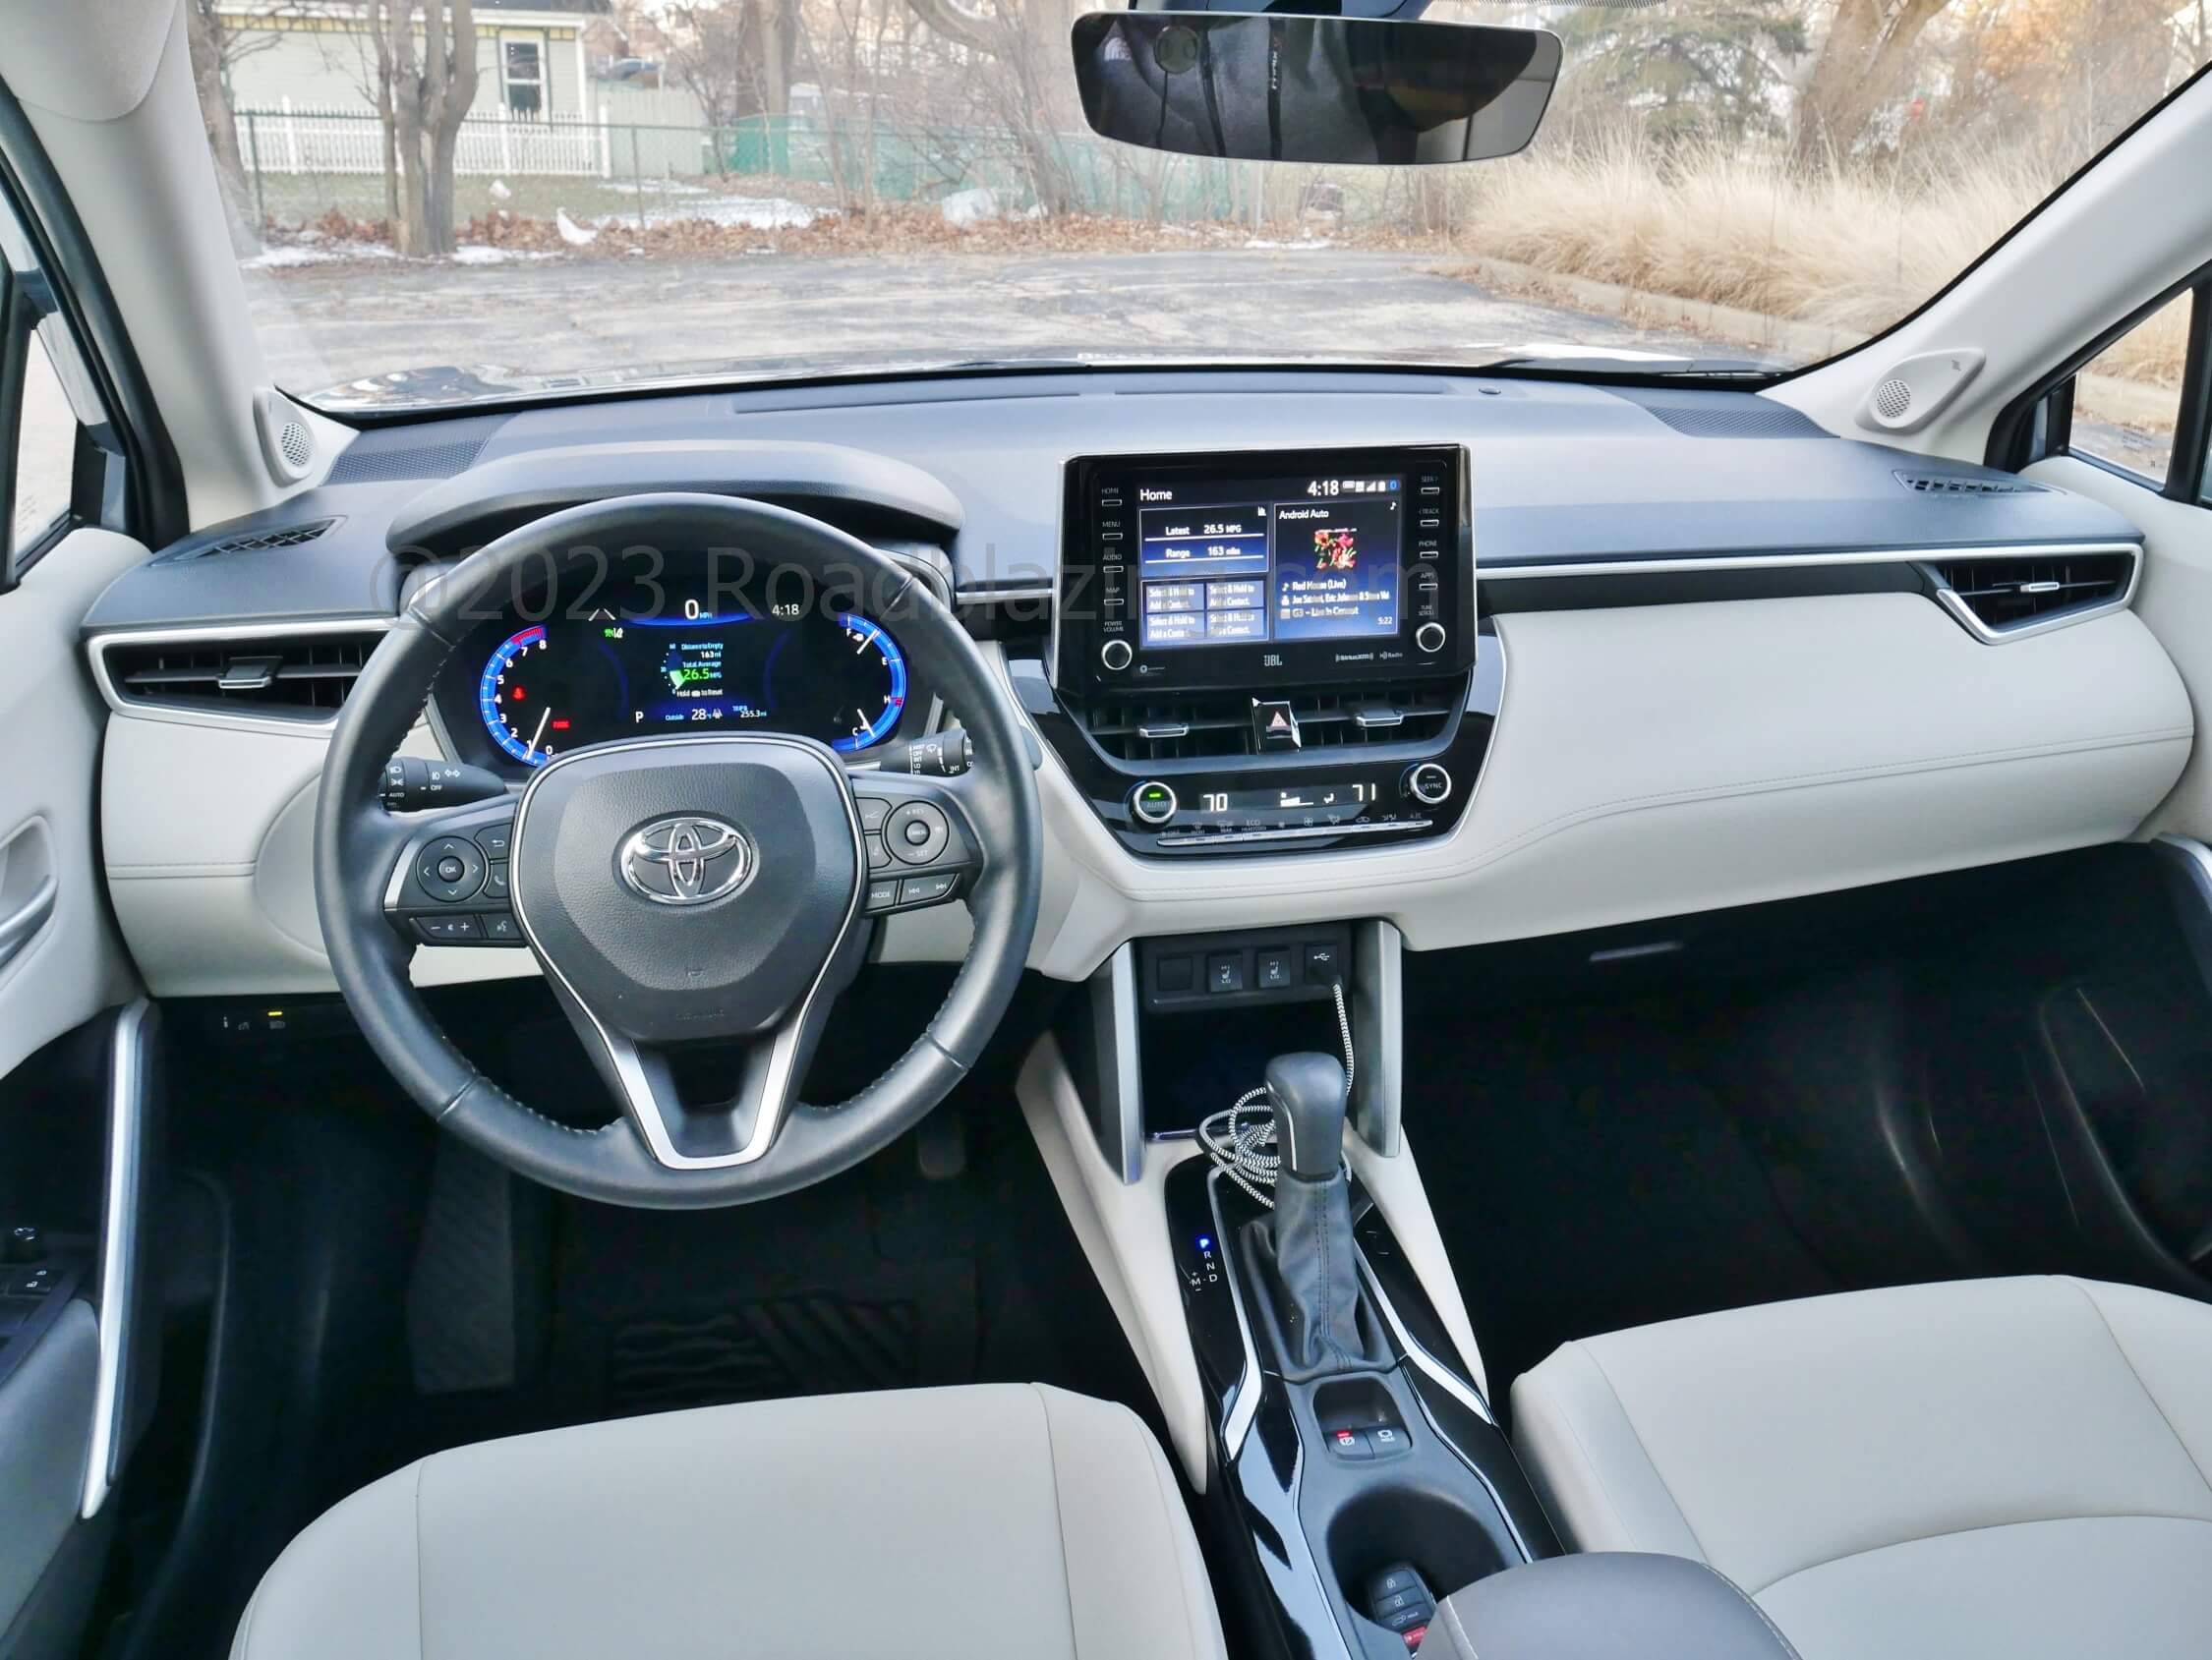 2022 Toyota Corolla Cross XLE AWD: rather airy low clutter cockpit straight out of a Corolla Hatchback, retains hard dash top.